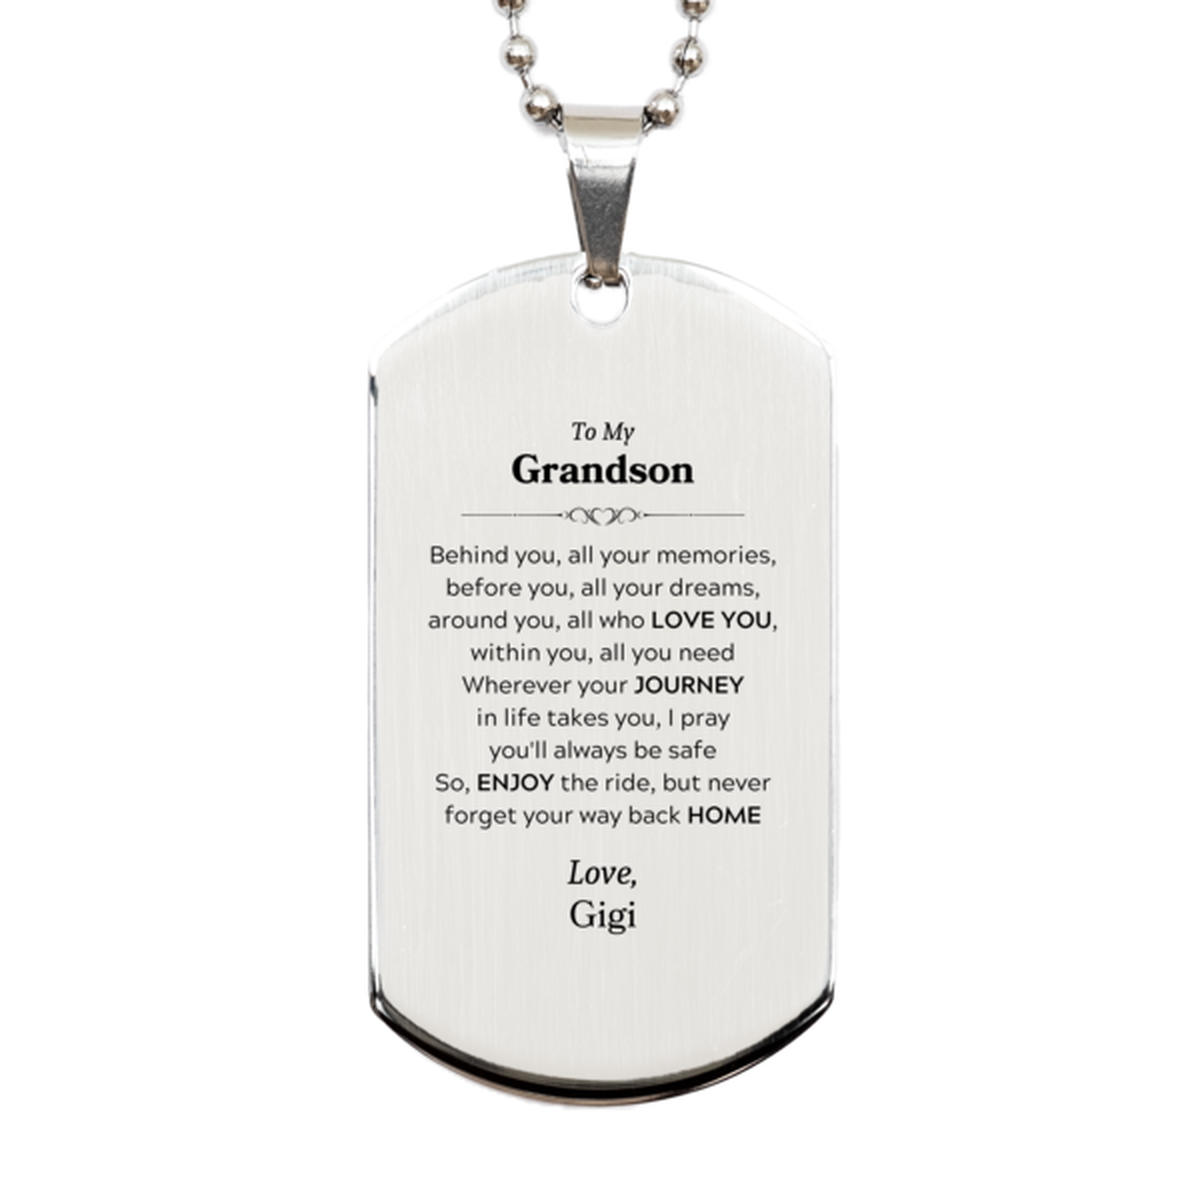 To My Grandson Graduation Gifts from Gigi, Grandson Silver Dog Tag Christmas Birthday Gifts for Grandson Behind you, all your memories, before you, all your dreams. Love, Gigi